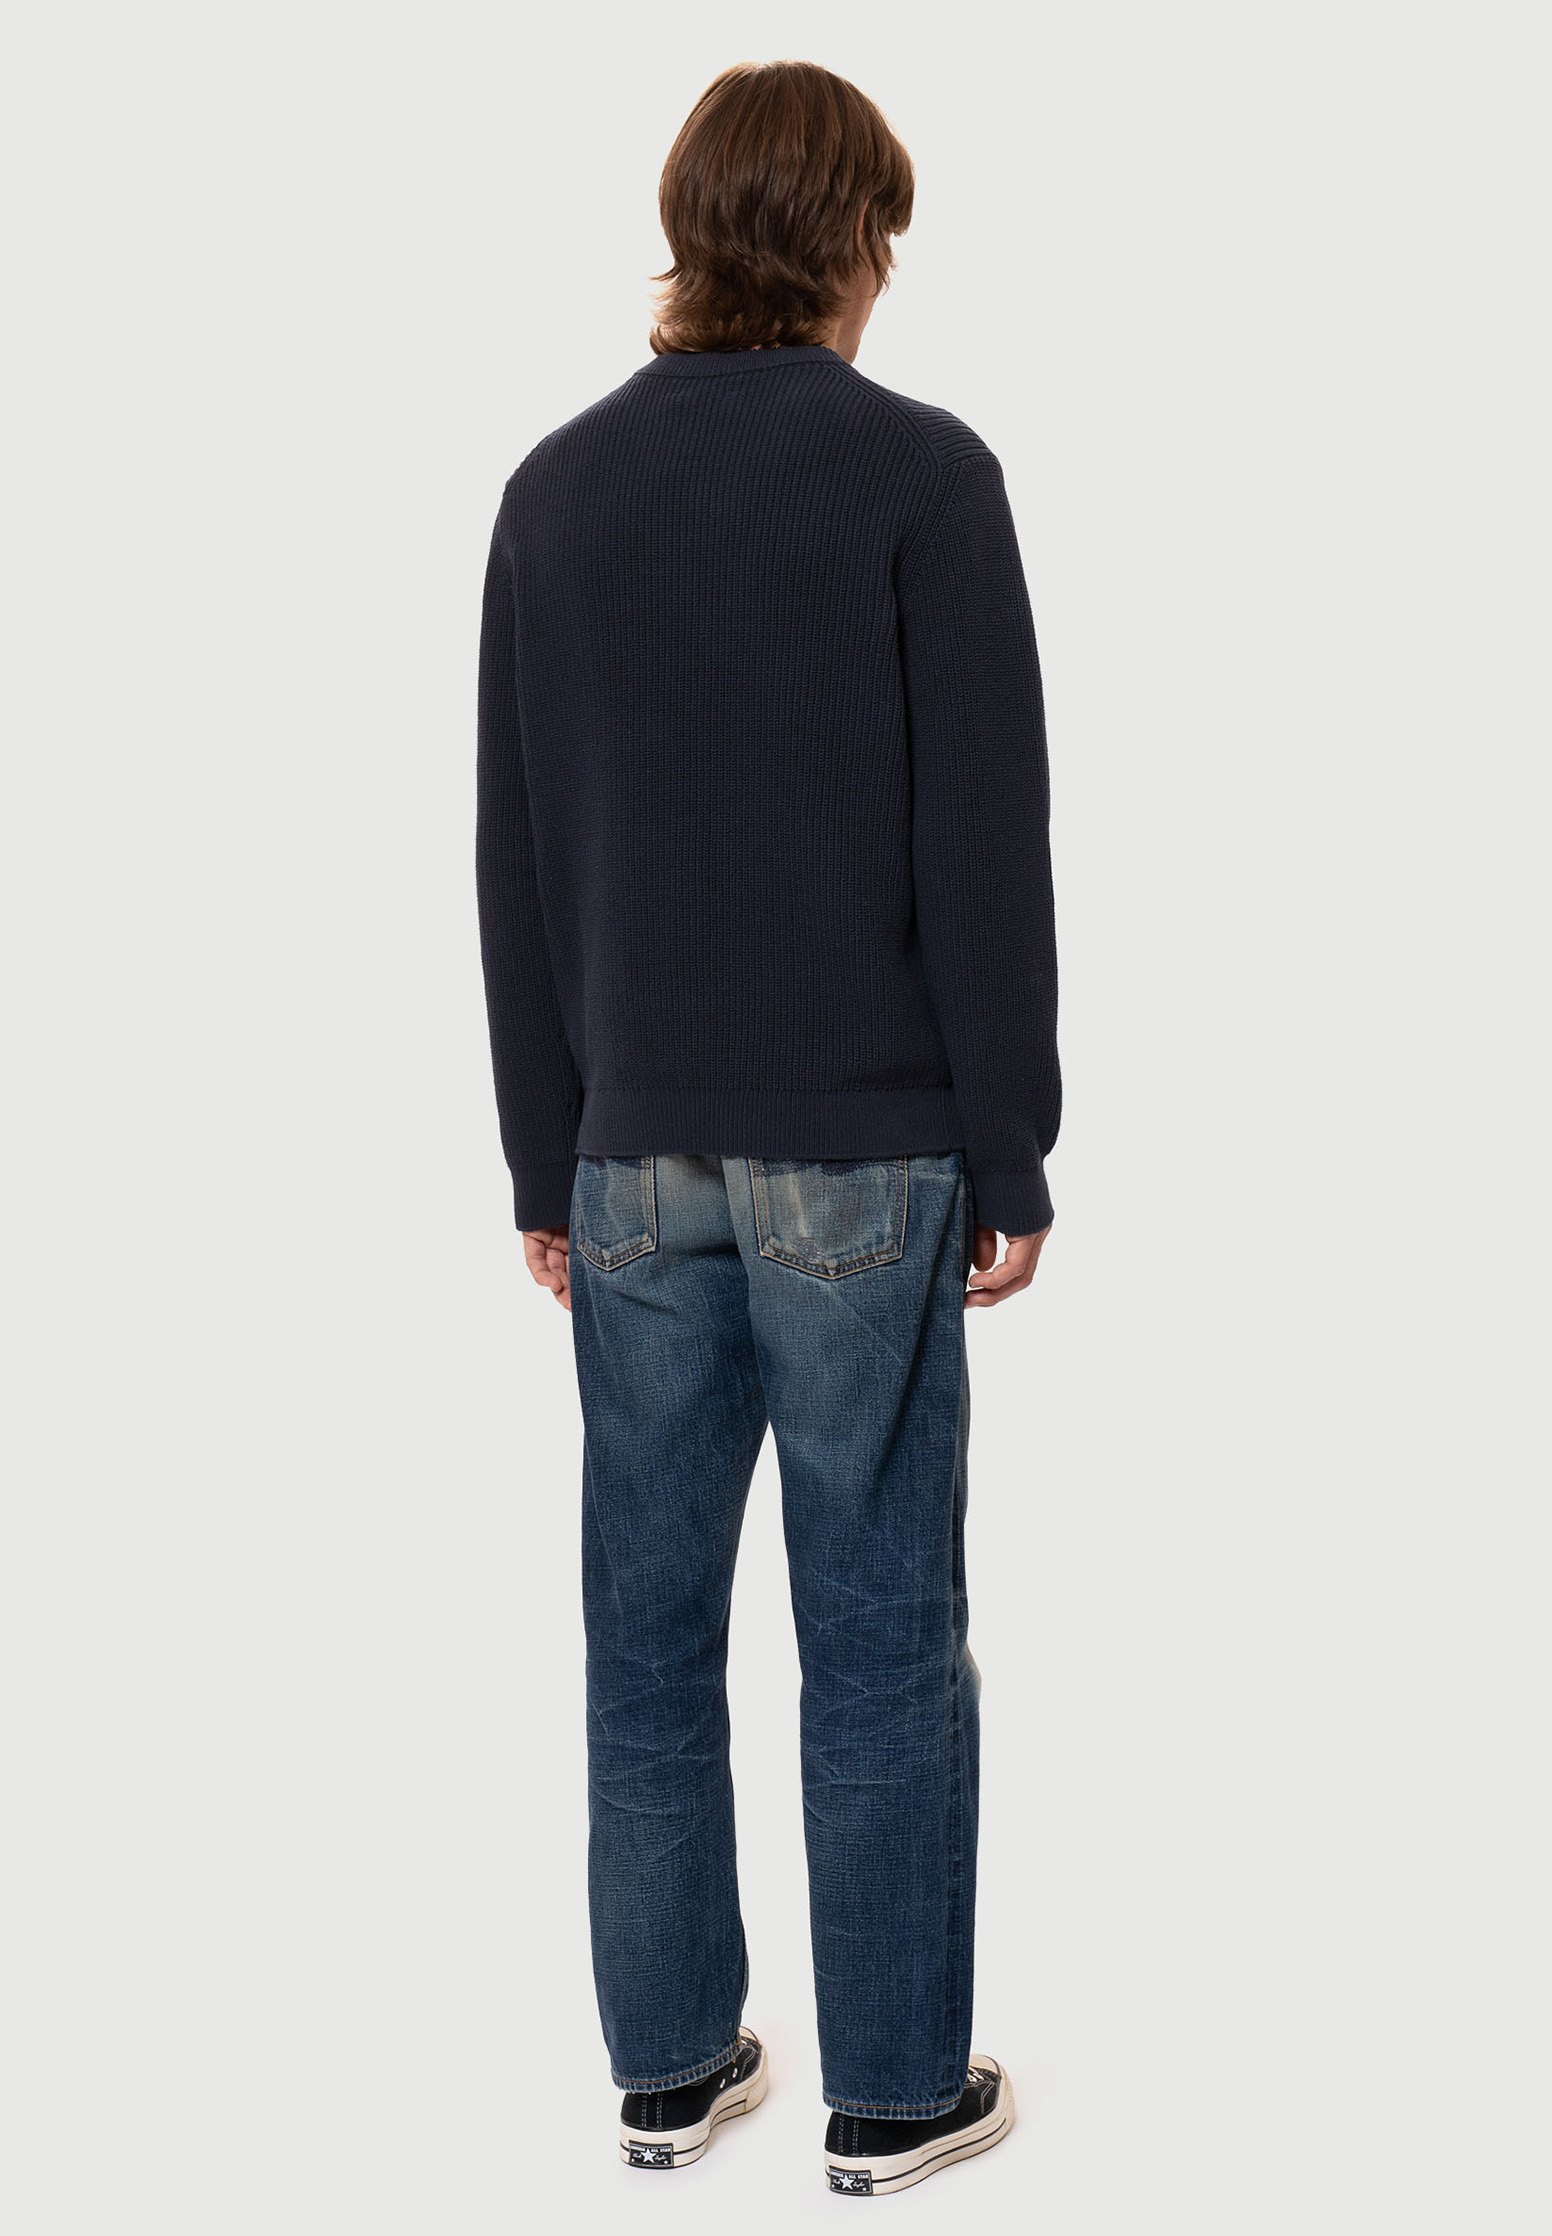 NUDIE JEANS August Rib Cotton navy S